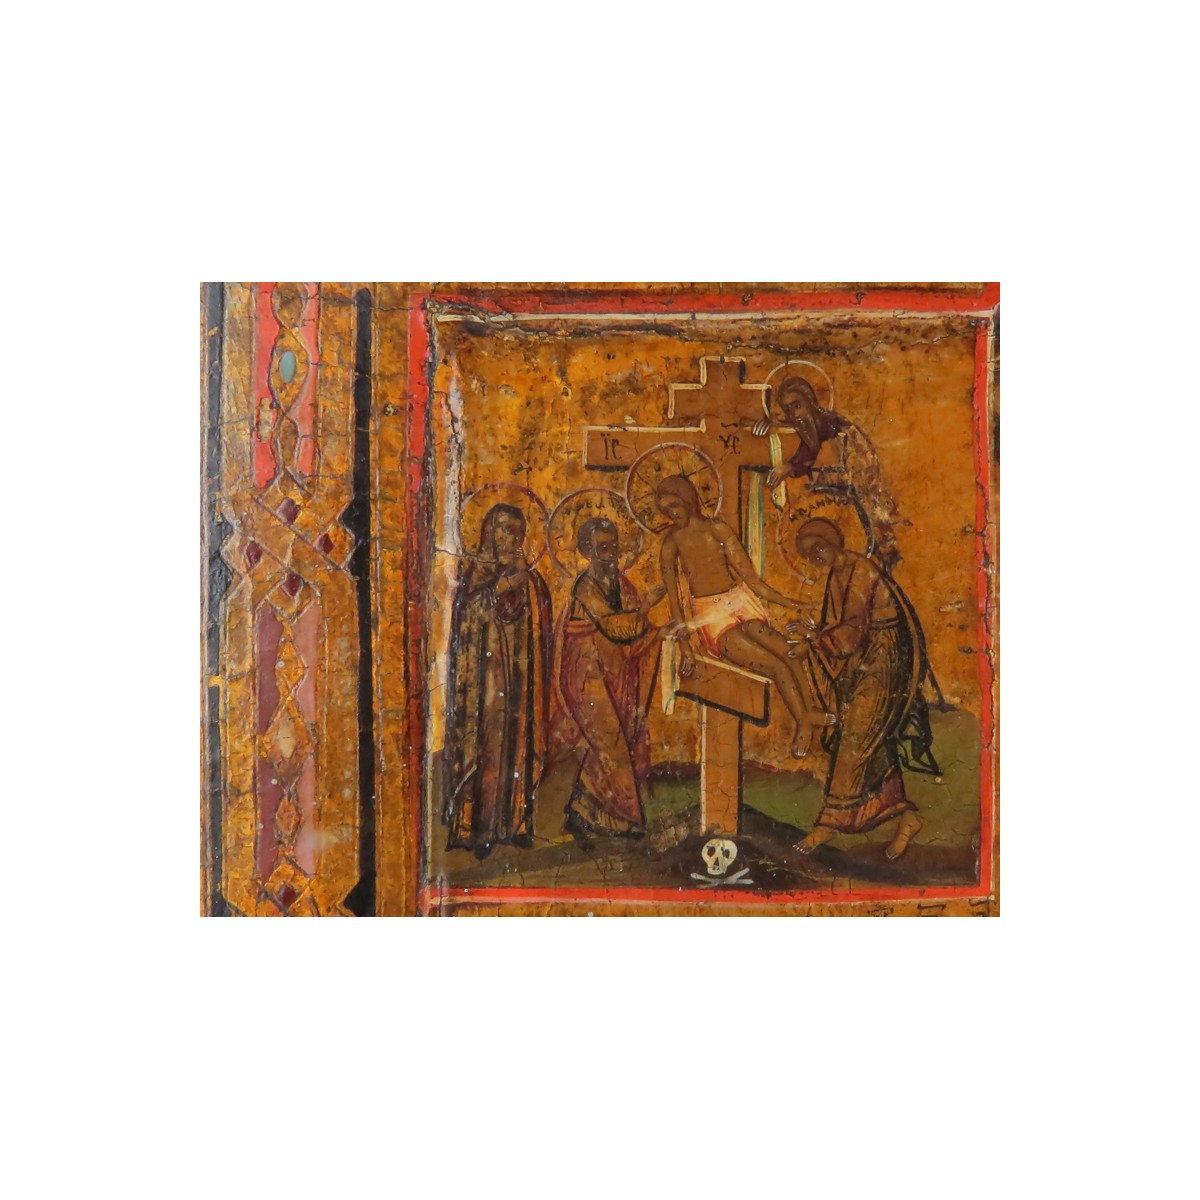 18th Century Russian Painted and Parcel Gilt Icon on Panel Depicting the Crucifixion of Christ. War